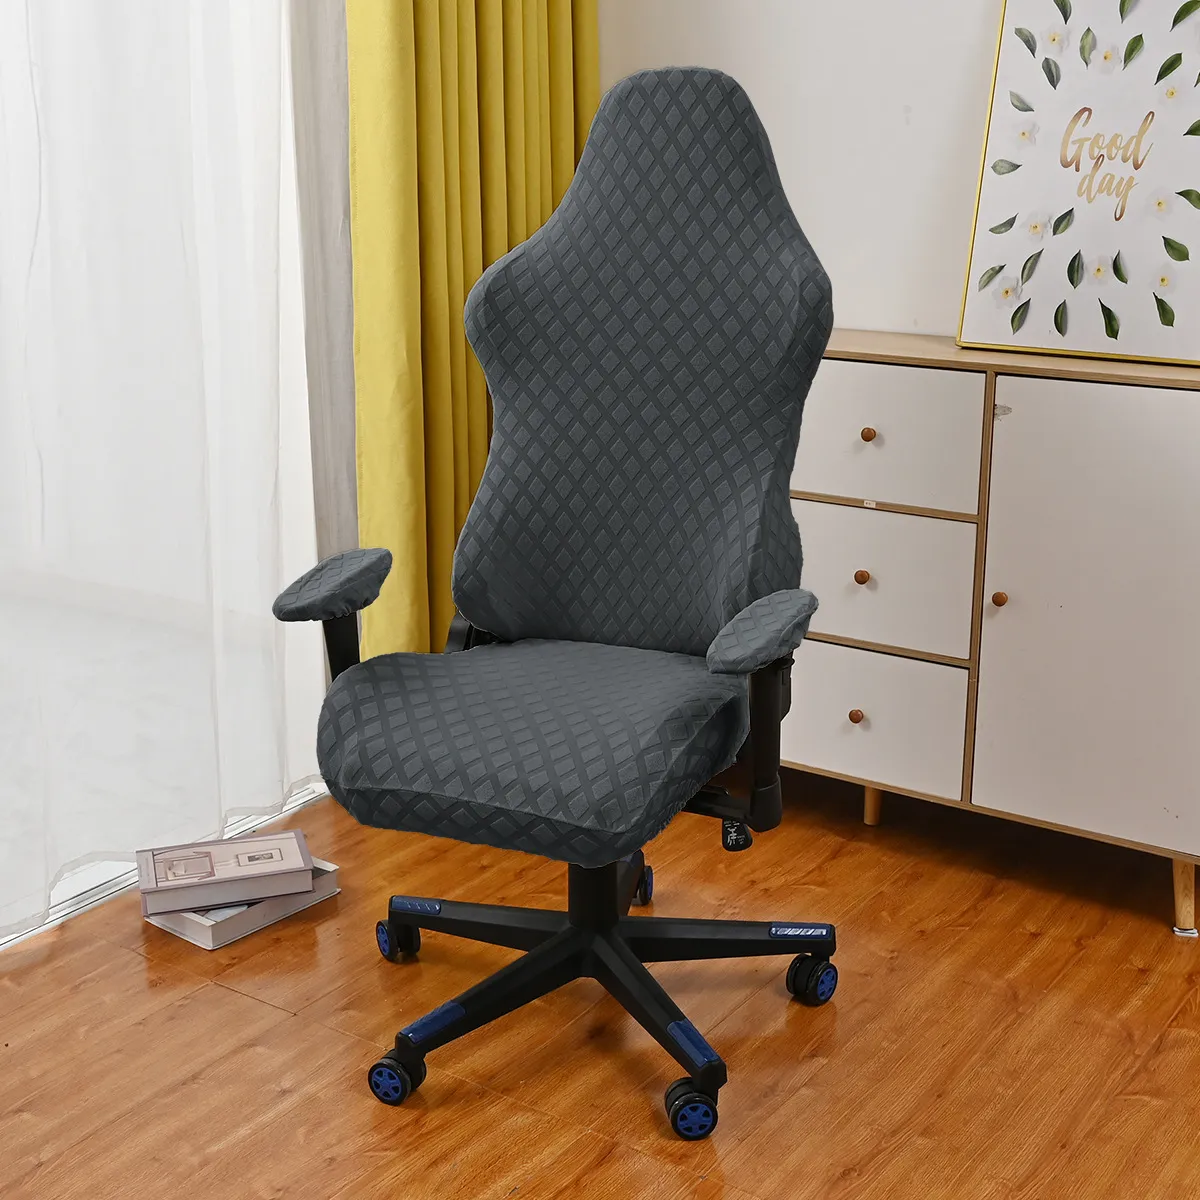 Solid Color Esports Chair Cover Office Chair Cover Universal Anti-dust Armchair Computer Gaming Chair Cover